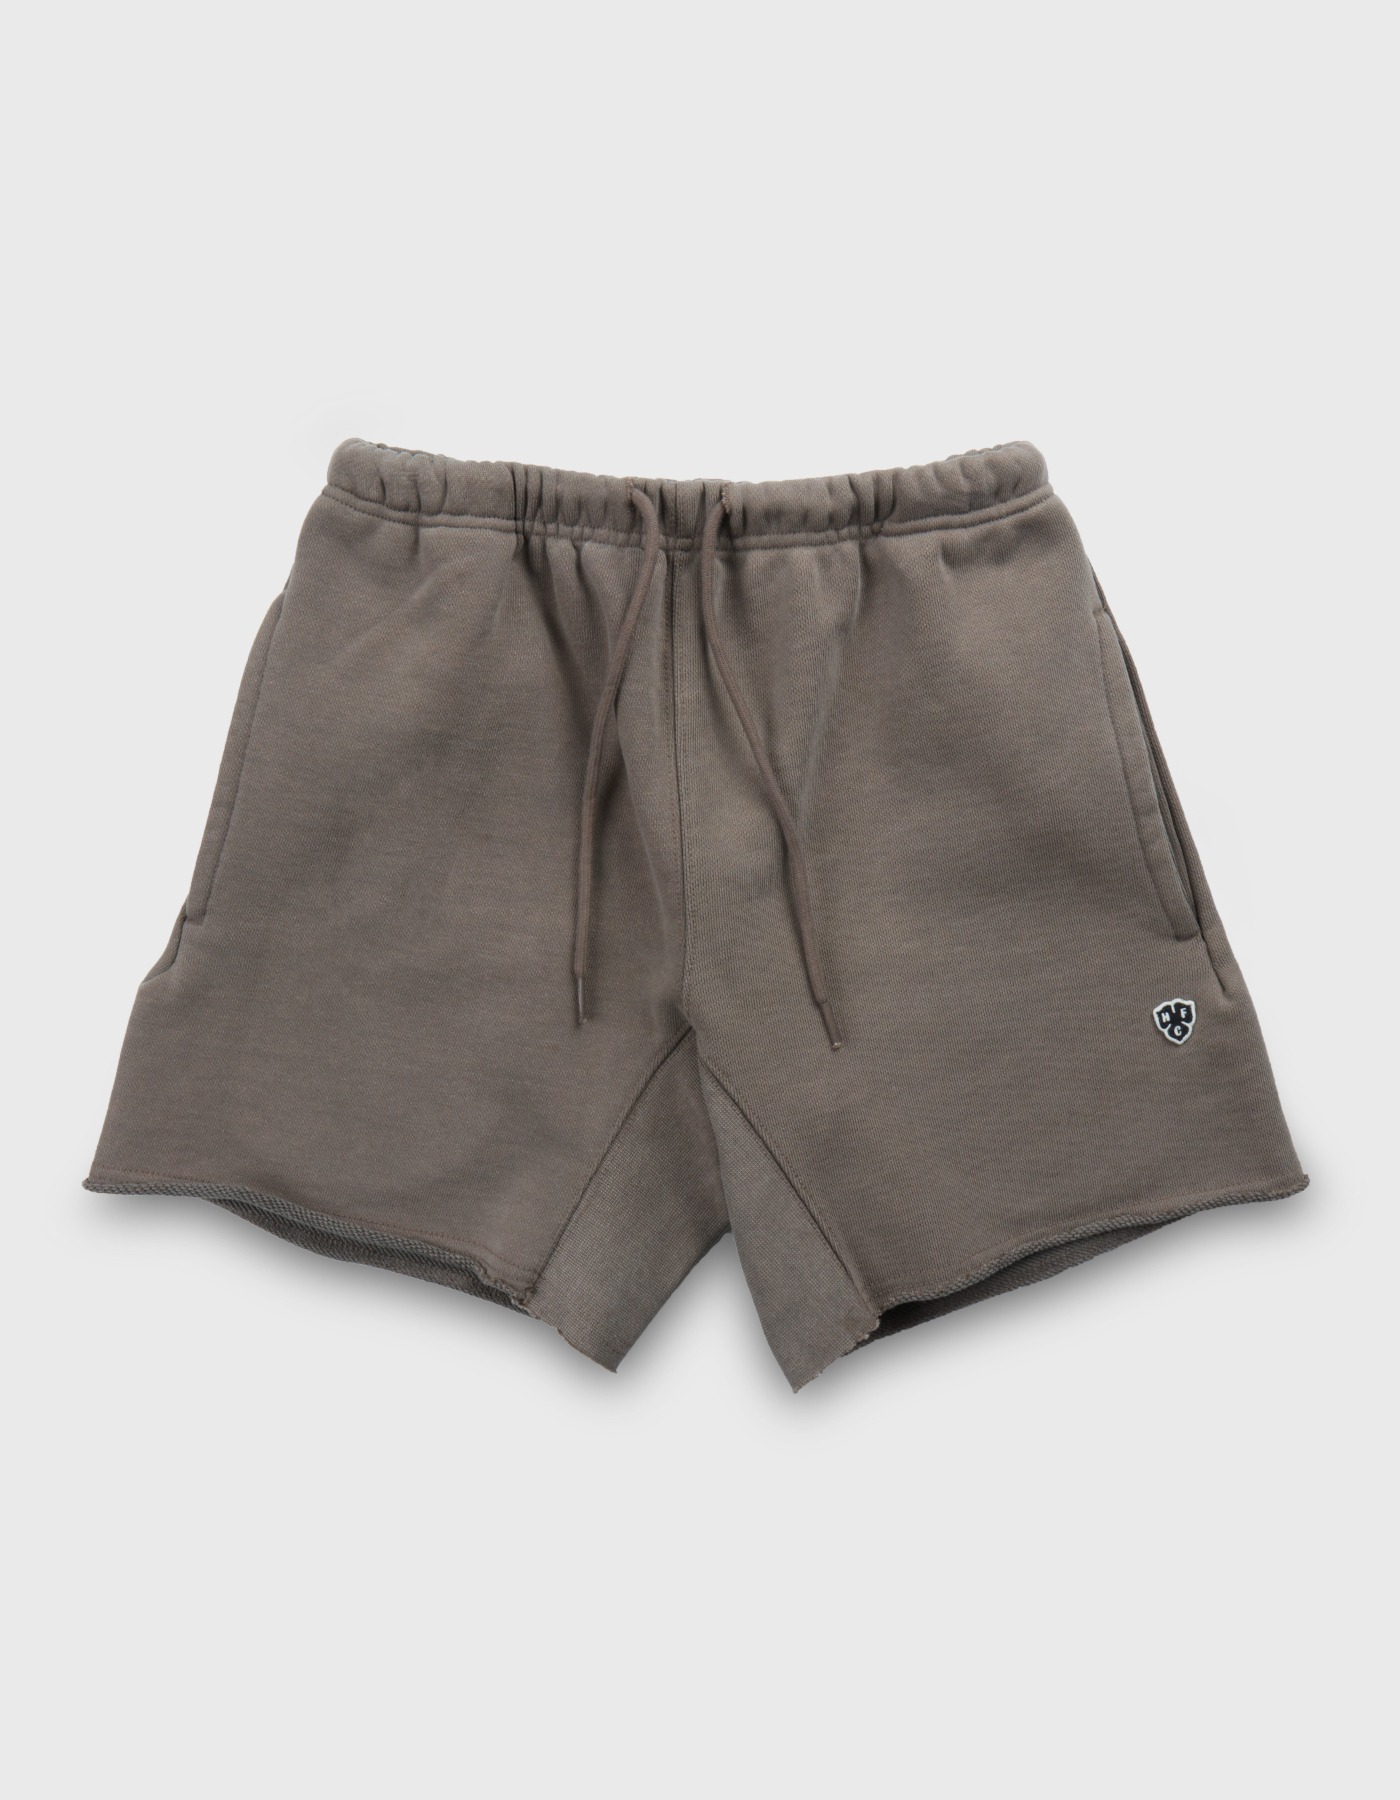 321 PIGMENT GYM SHORTS / Brown